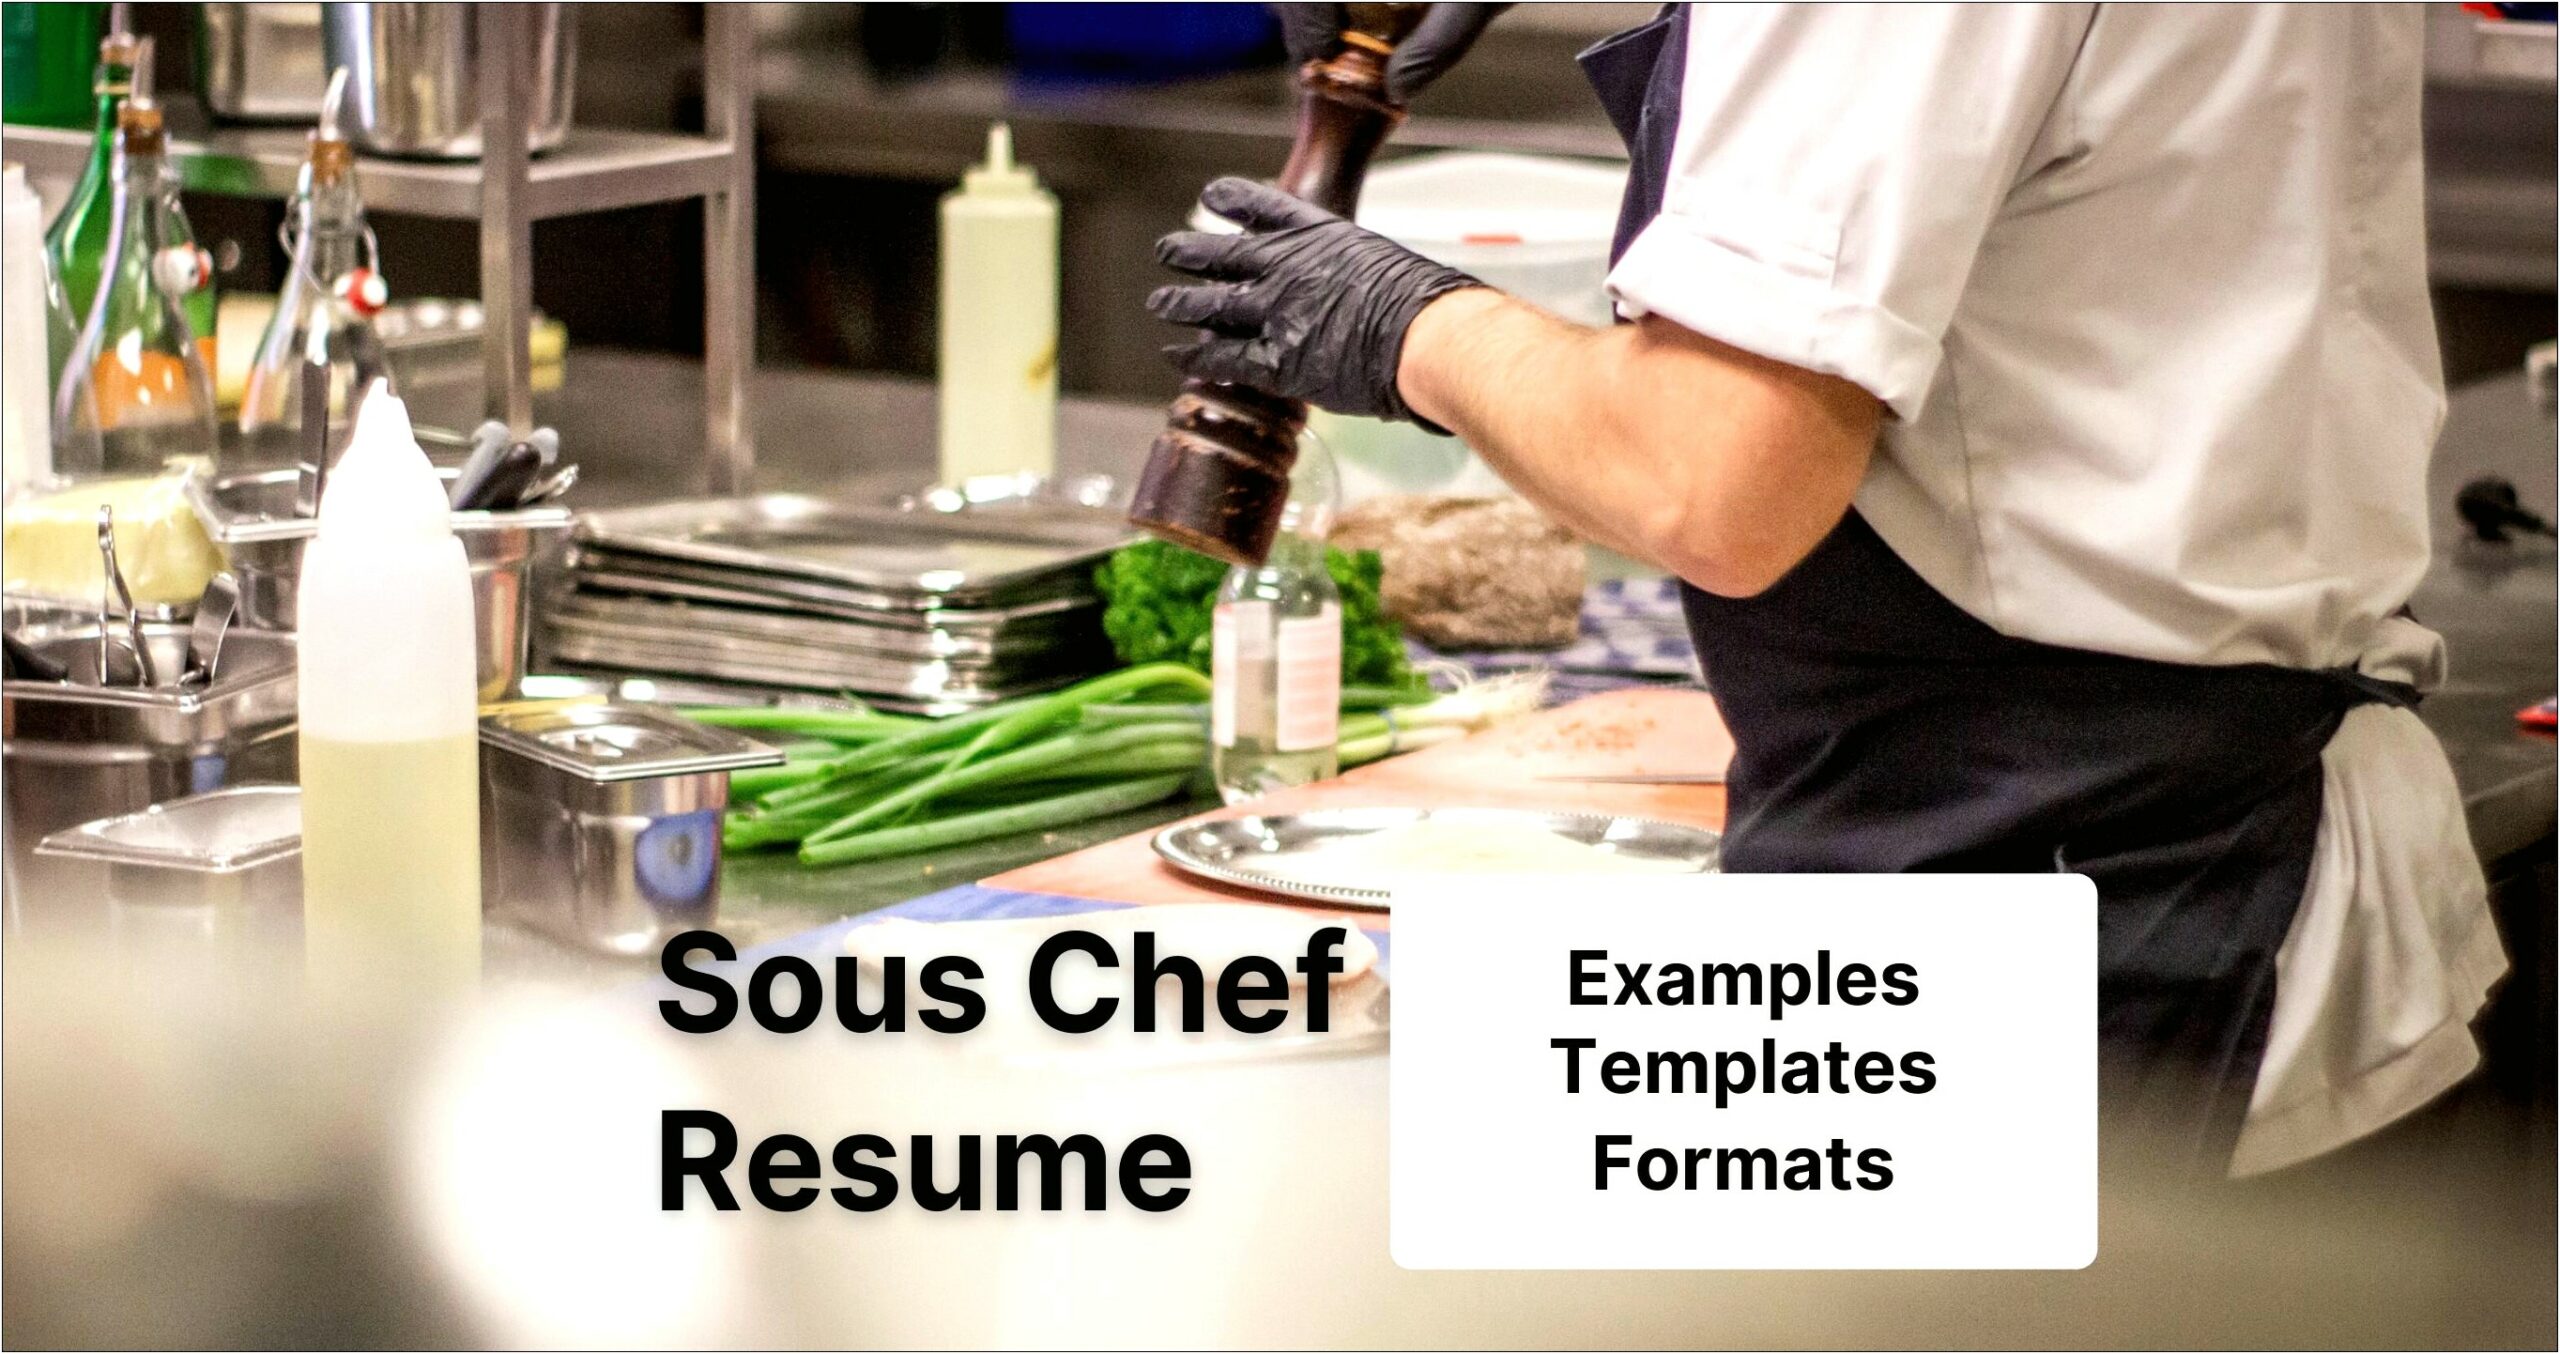 Action Words For Resume Culinary Arts